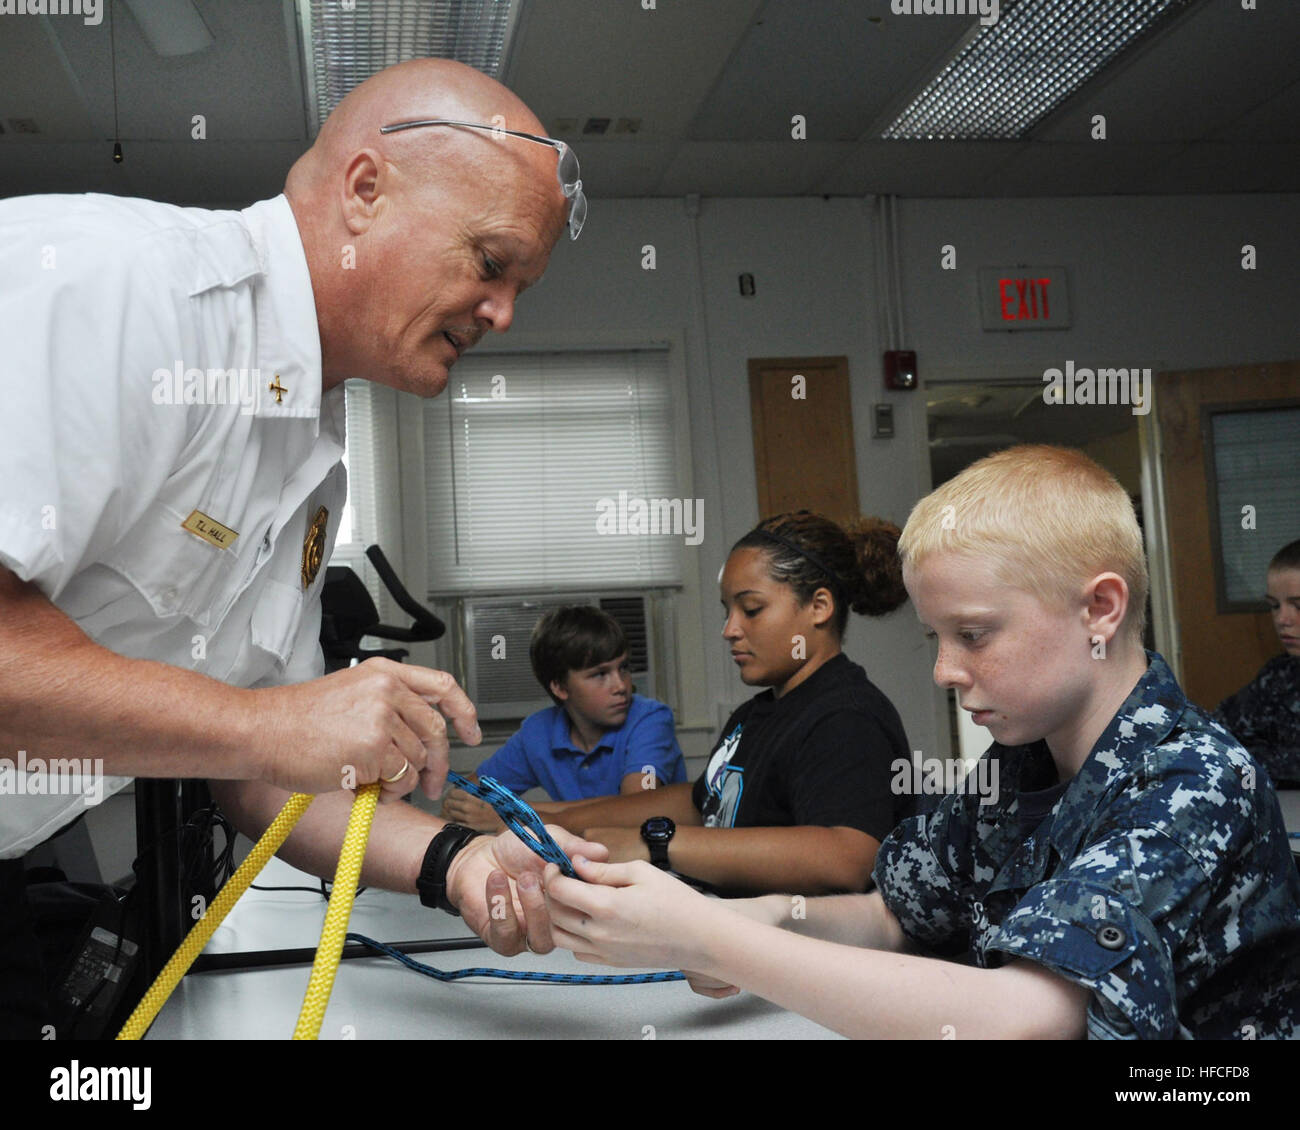 130608-N-CE356-004 USA (Jun. 8, 2013) Naval Support Faciilty (NSF) Dahlgren fire department battalion chief Tracy Hall offers some knot-tying pointers to Navy League Cadet LC2 Michael Feeser.  The training was part of a monthly drill weekend for the Pentagon Division of the U.S. Naval Sea Cadet Corps, which is hosted on NSF Dahlgren by Naval Support Activity South Potomac. (U.S. Navy photo by Andrew Revelos/Released) Naval Support Facility (NSF) Dahlgren fire department battalion chief Tracy Hall offers some knot-tying pointers to a Navy League cadet Stock Photo